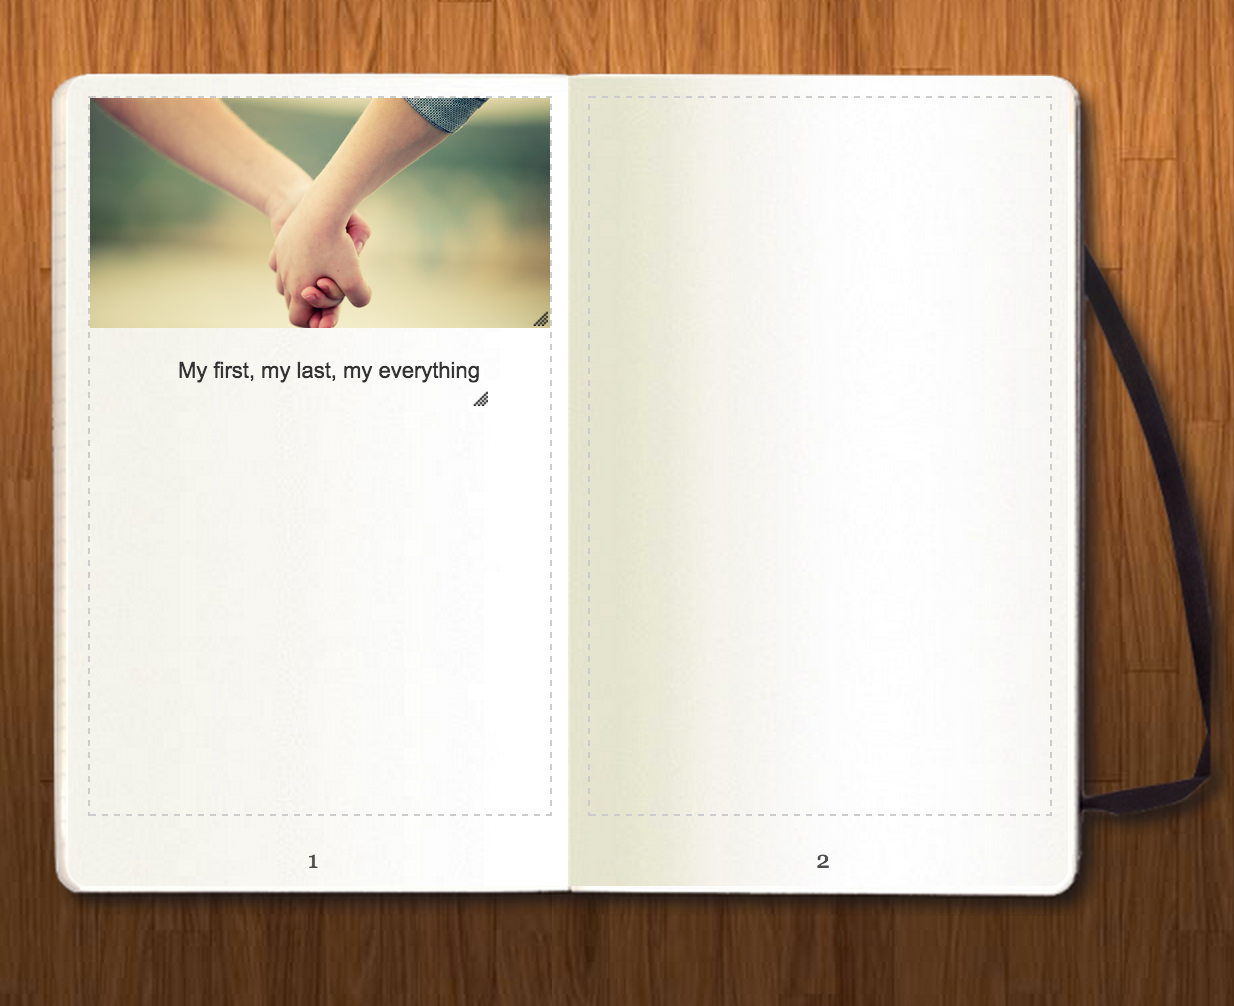 Personalized VAlentines Gifts: custom Moleskines with your own photos + text